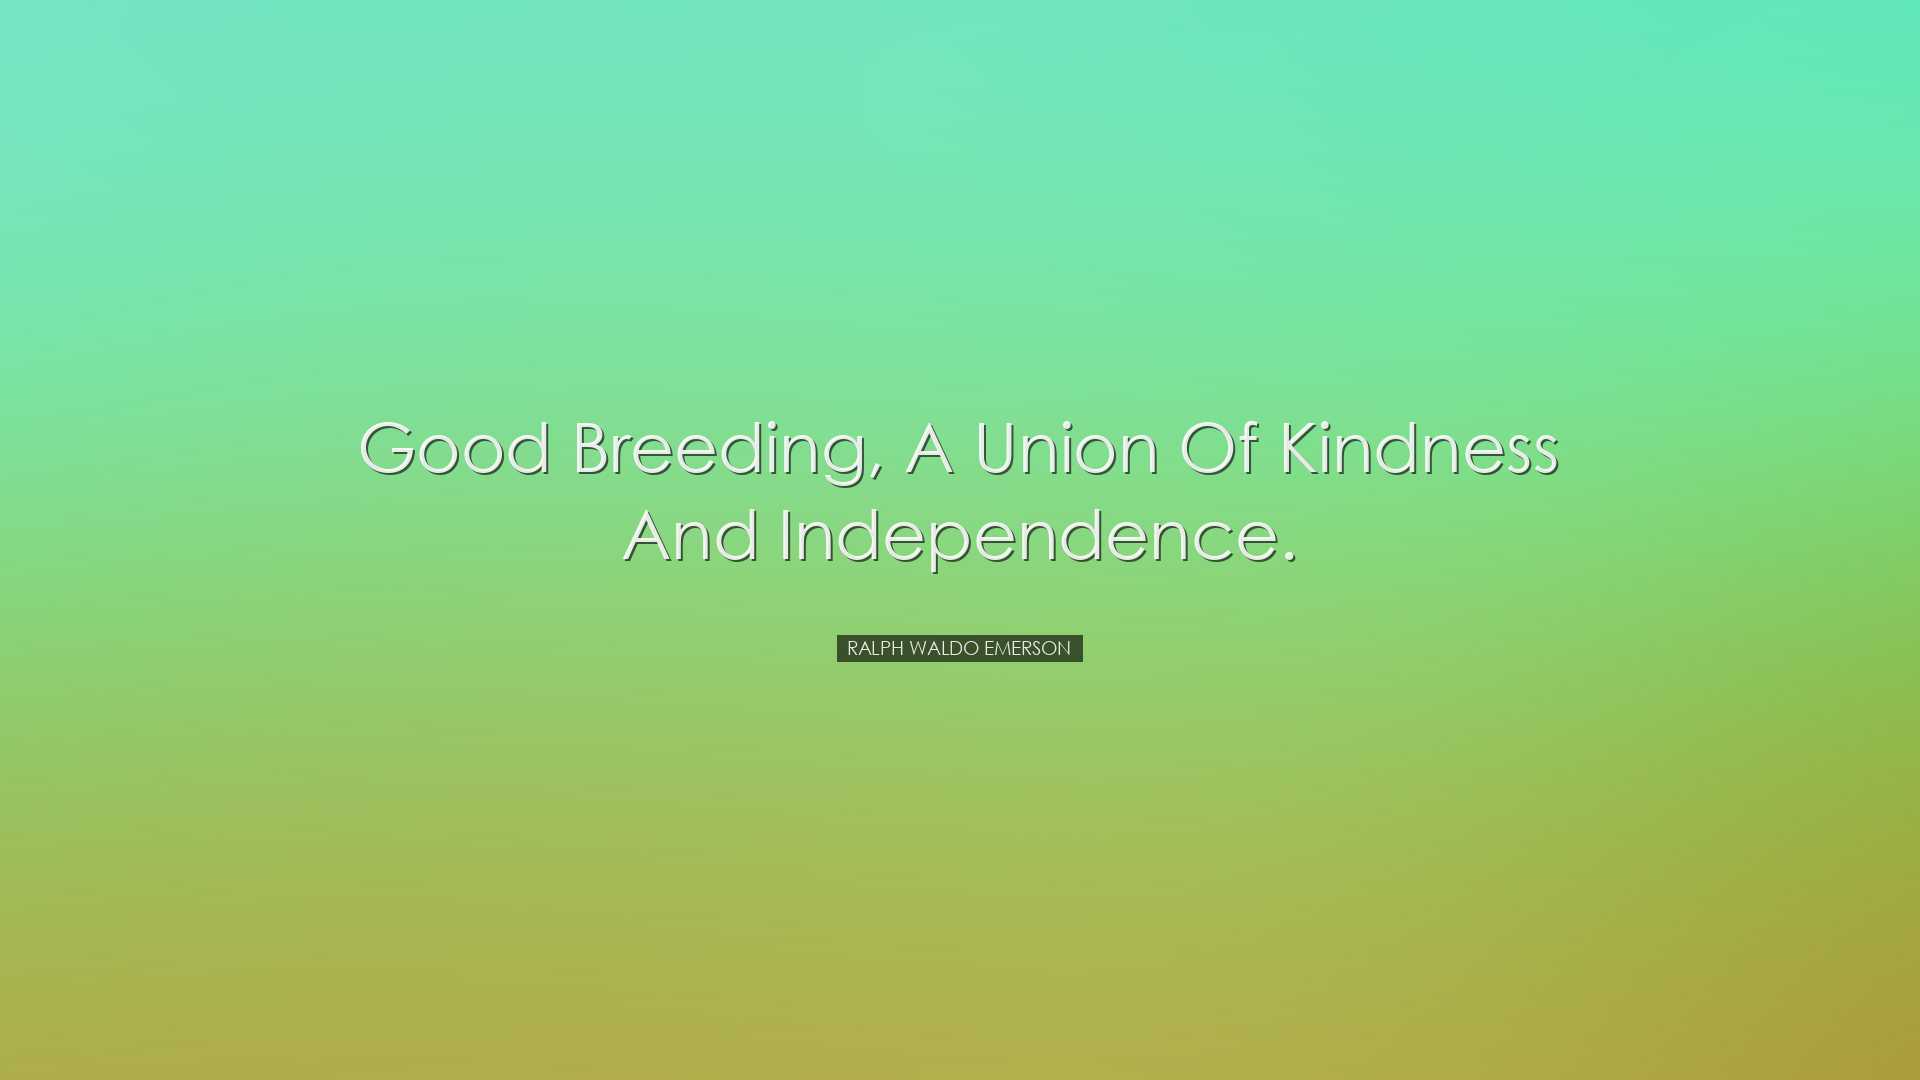 Good breeding, a union of kindness and independence. - Ralph Waldo